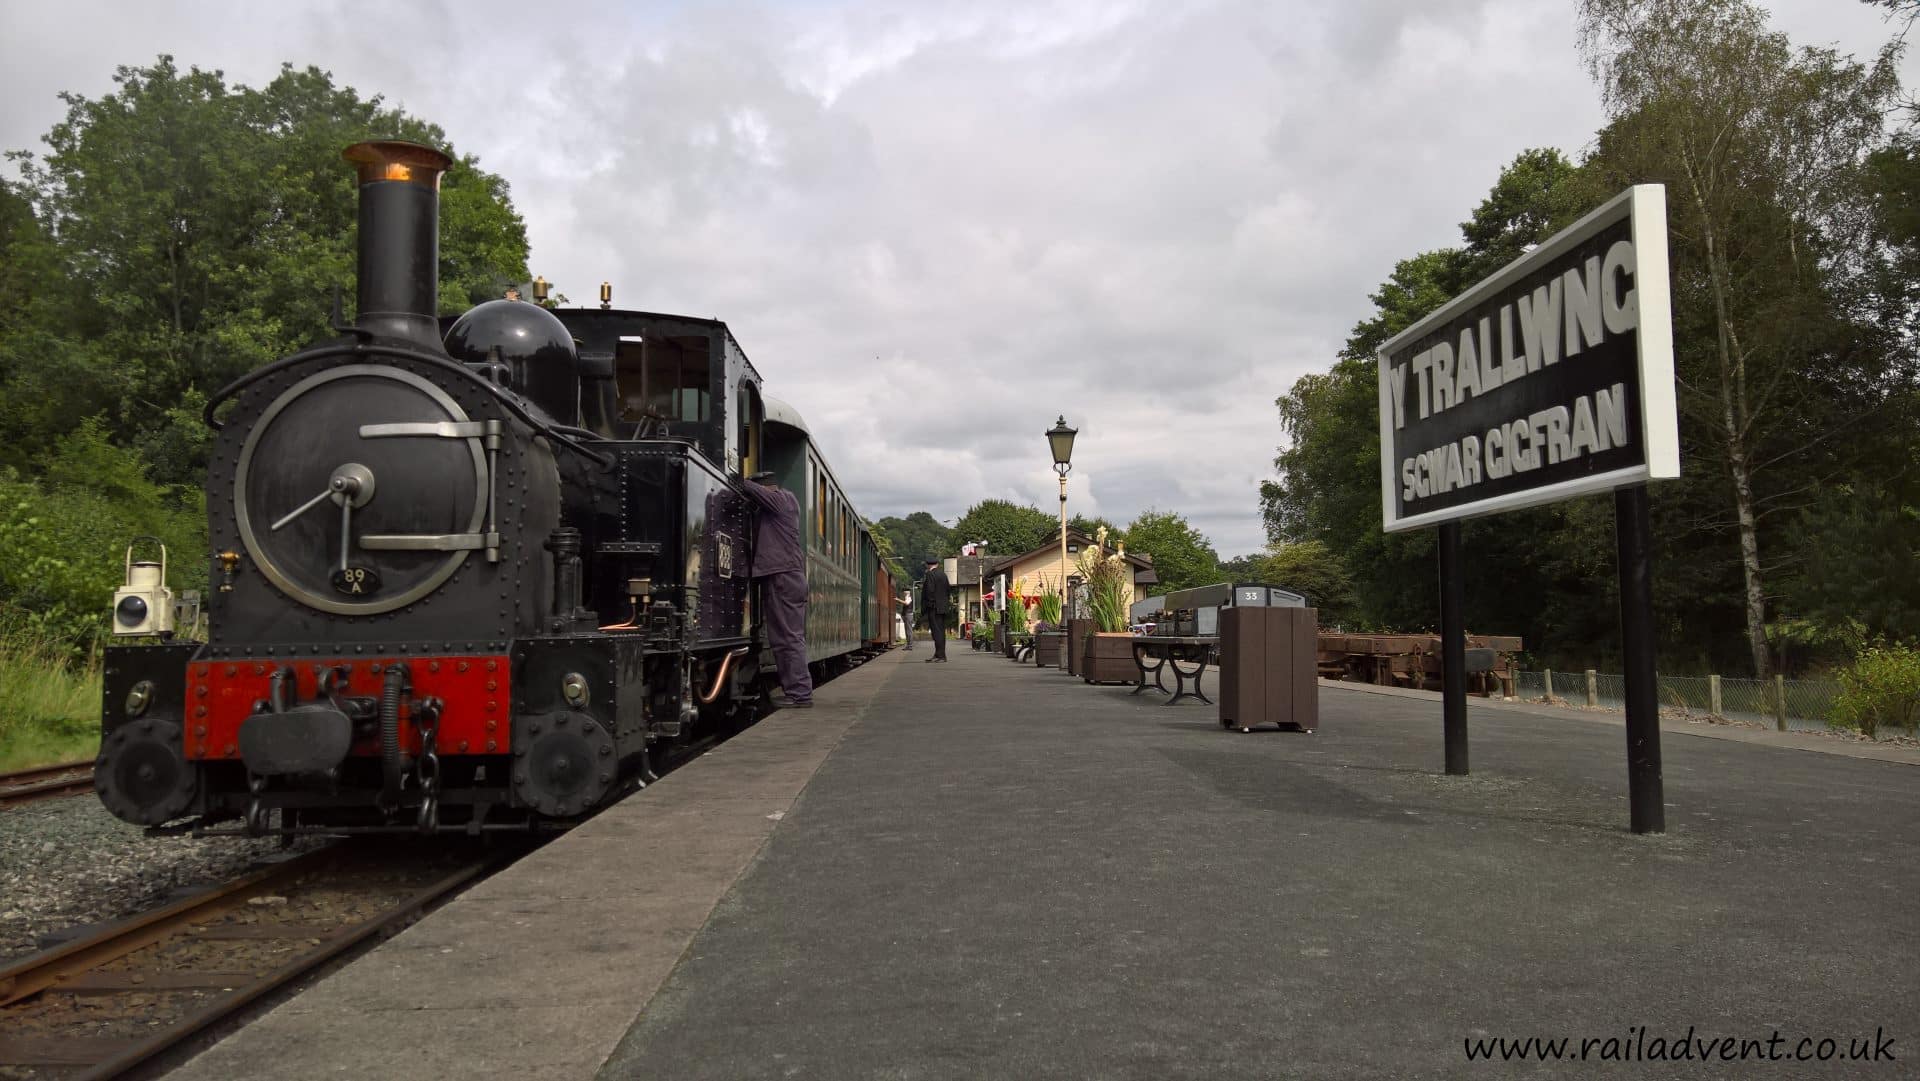 'The Earl' awaits departure from Welshpool Raven Square on the Welshpool & Llanfair Railway